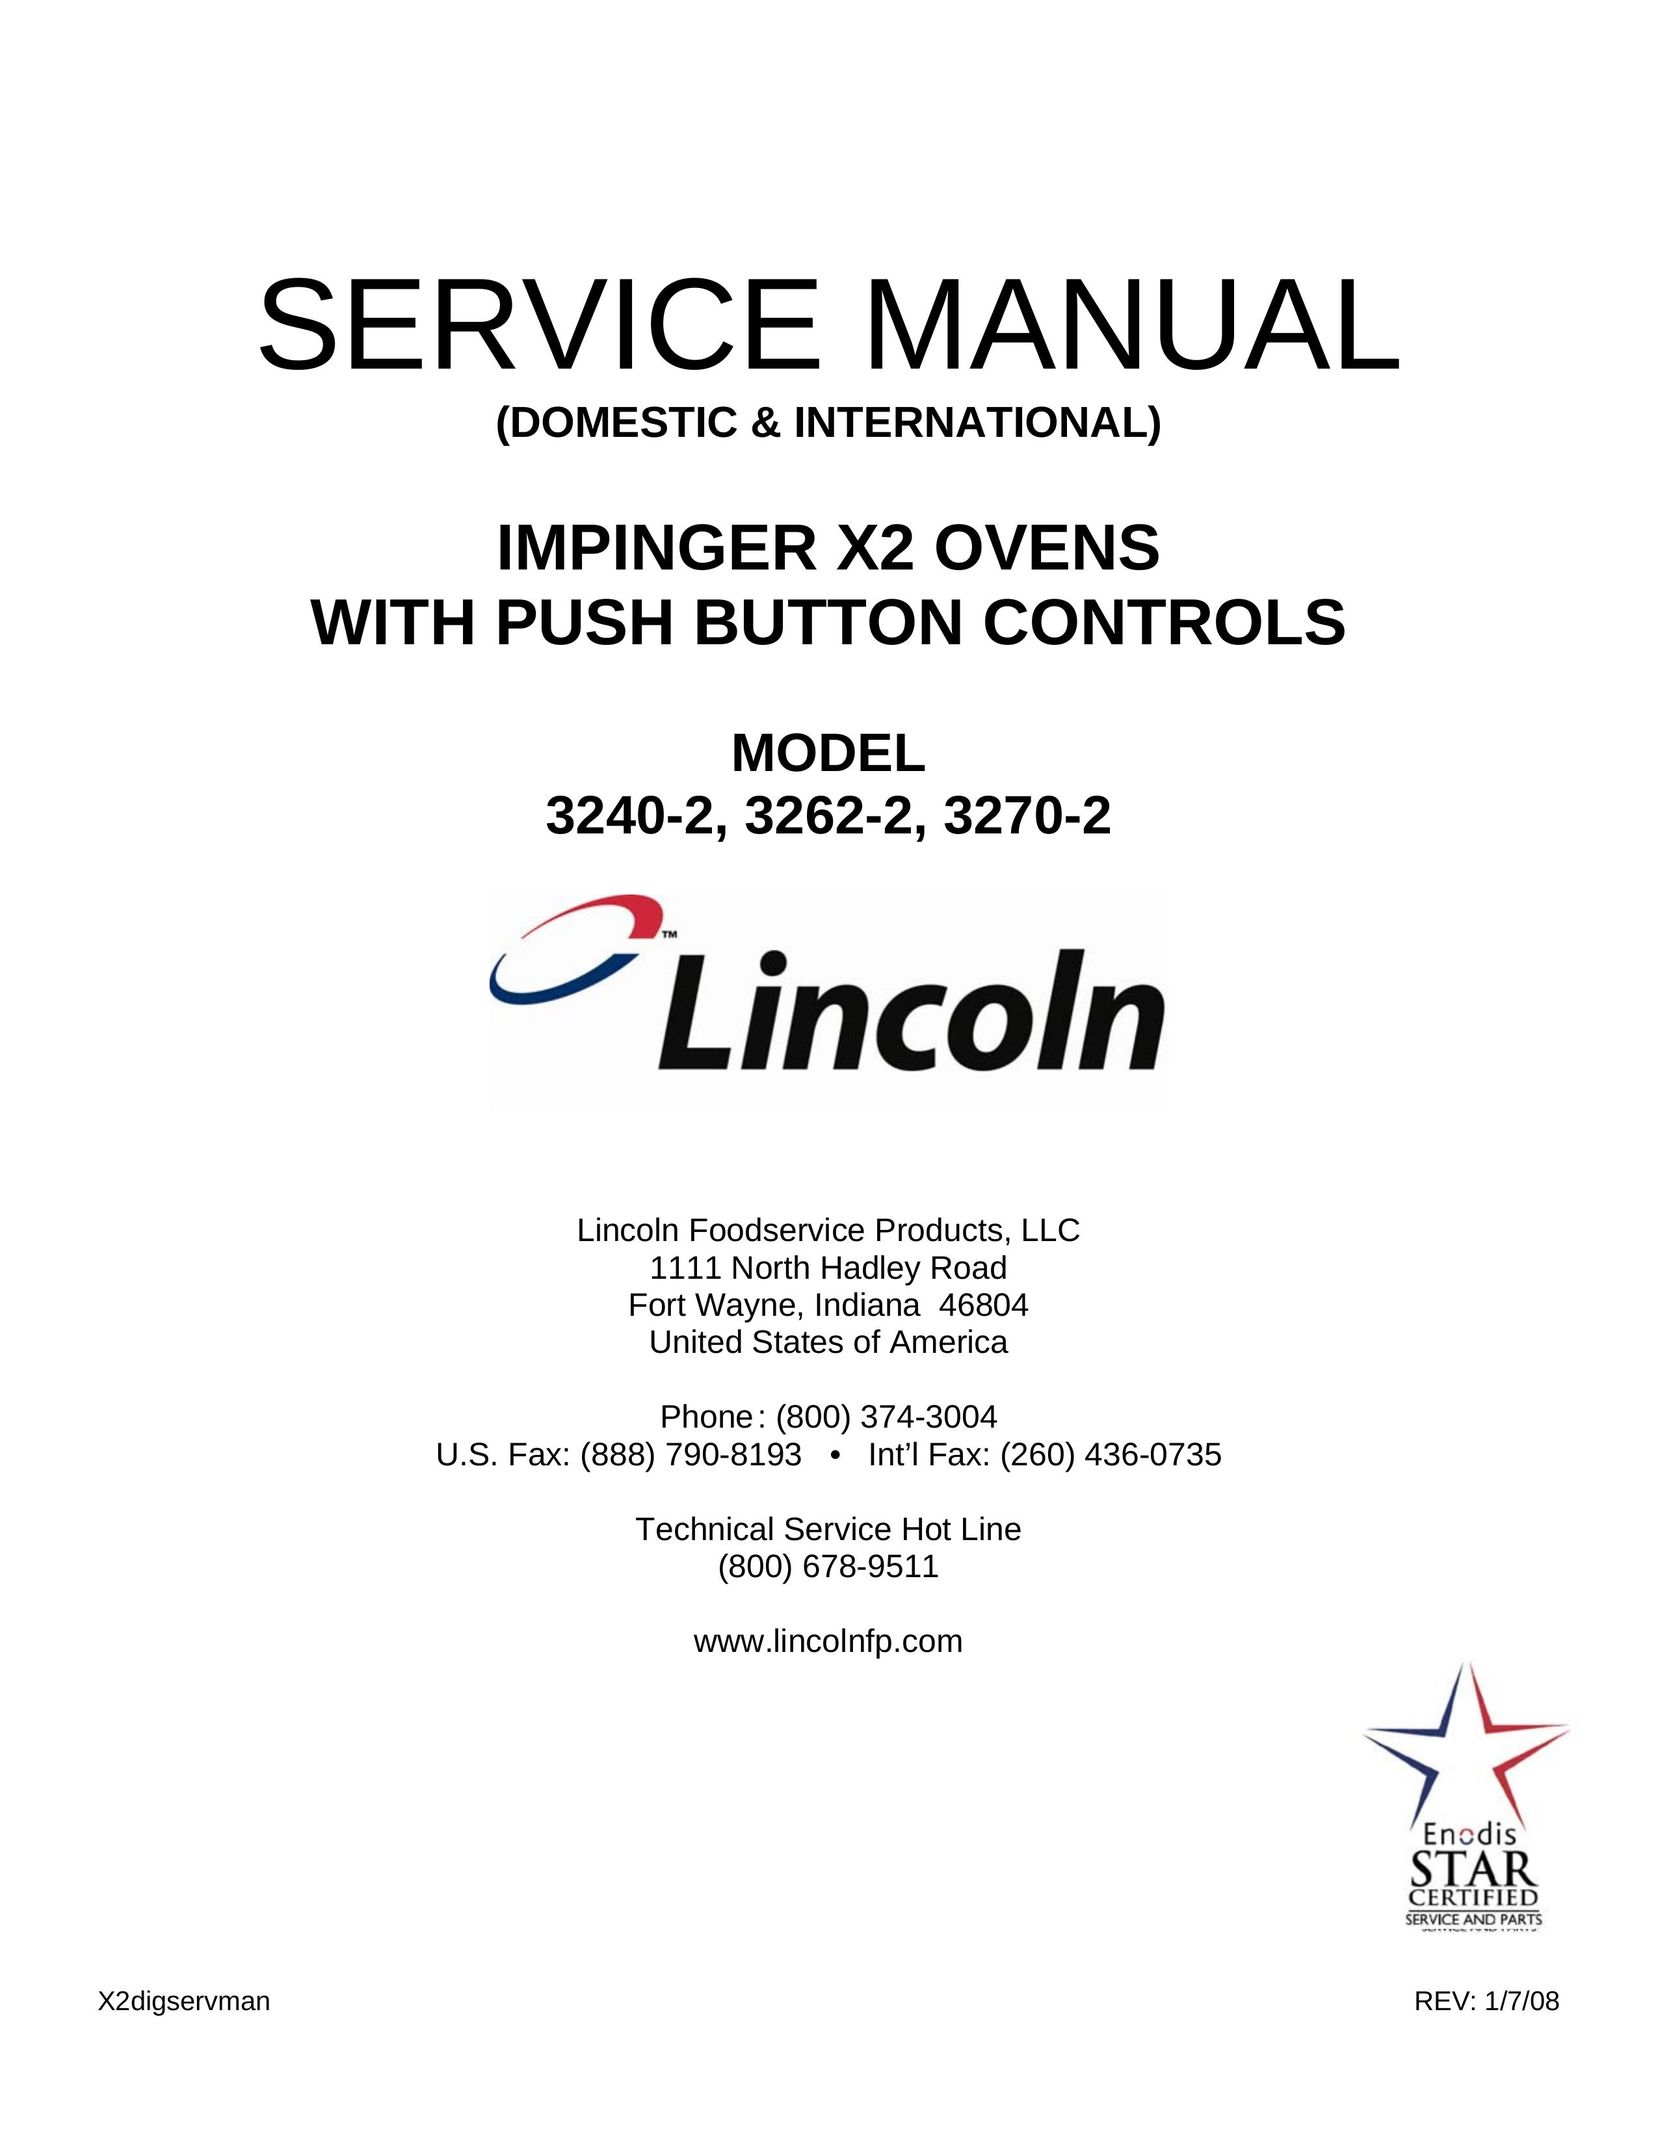 Lincoln 3270-2 Convection Oven User Manual